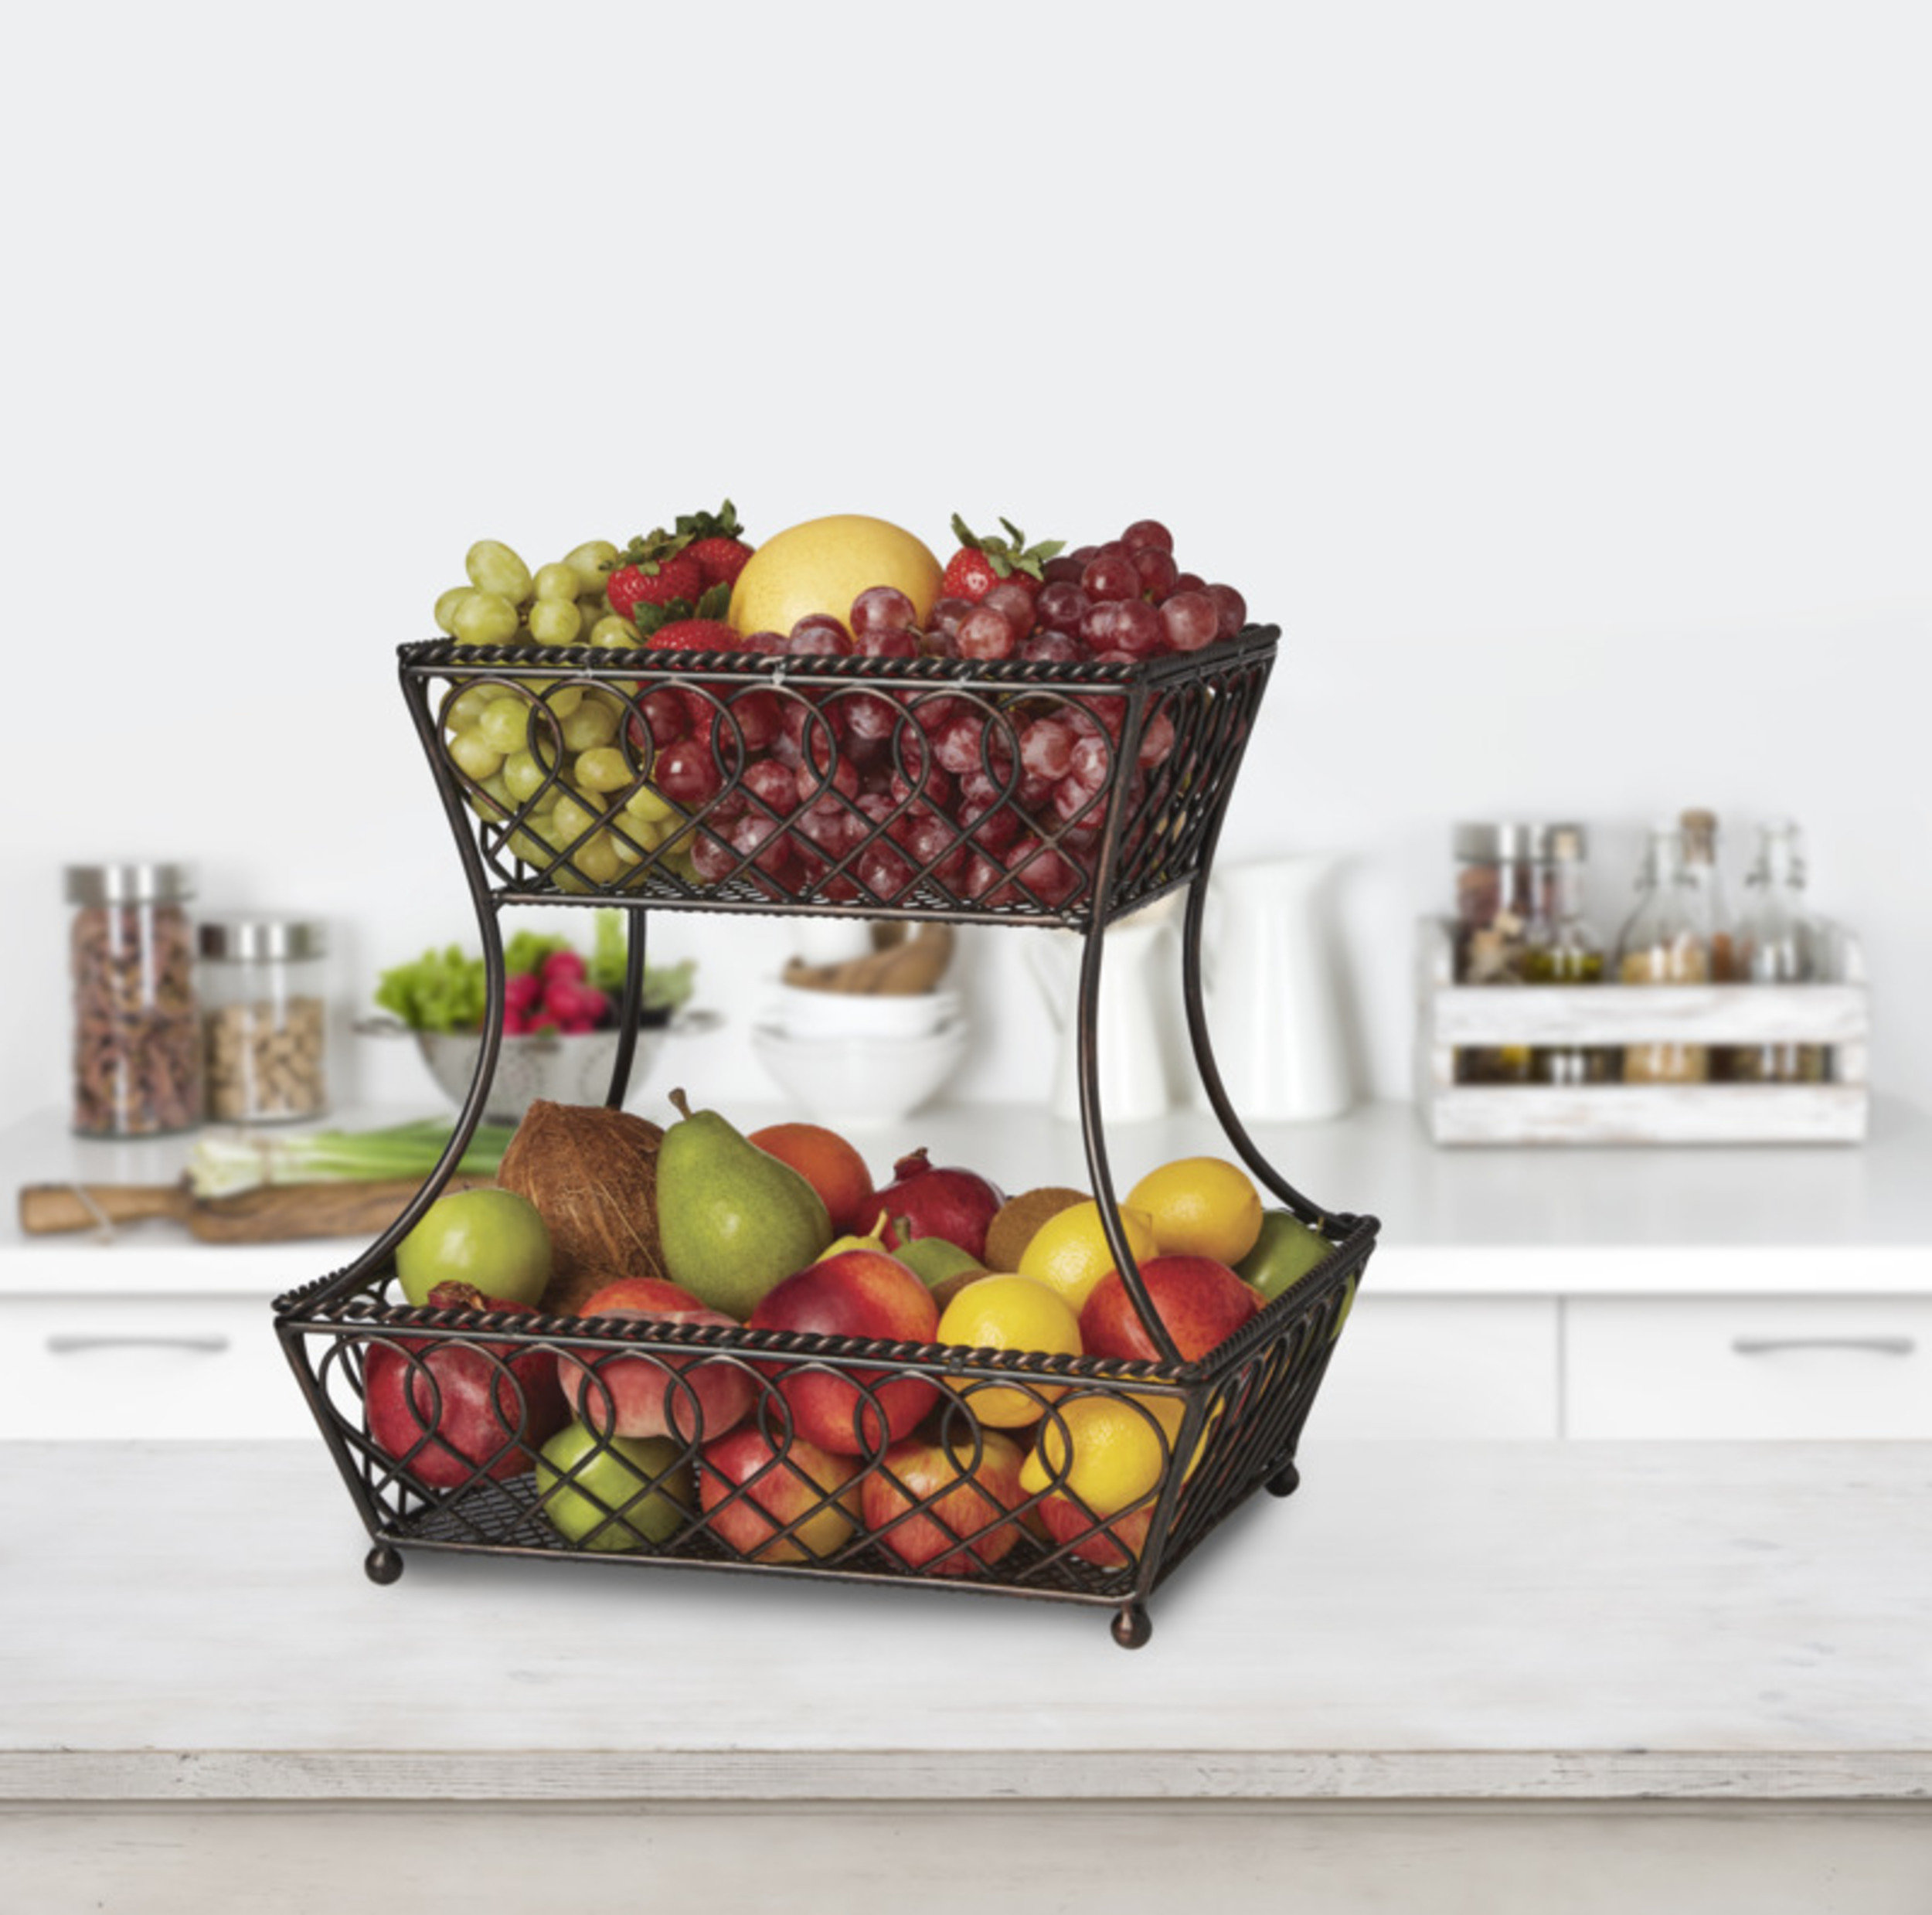 Stainless Steel 2 Tier Wire Fruit Basket Bowl for Kitchen Counter Stand with Bread